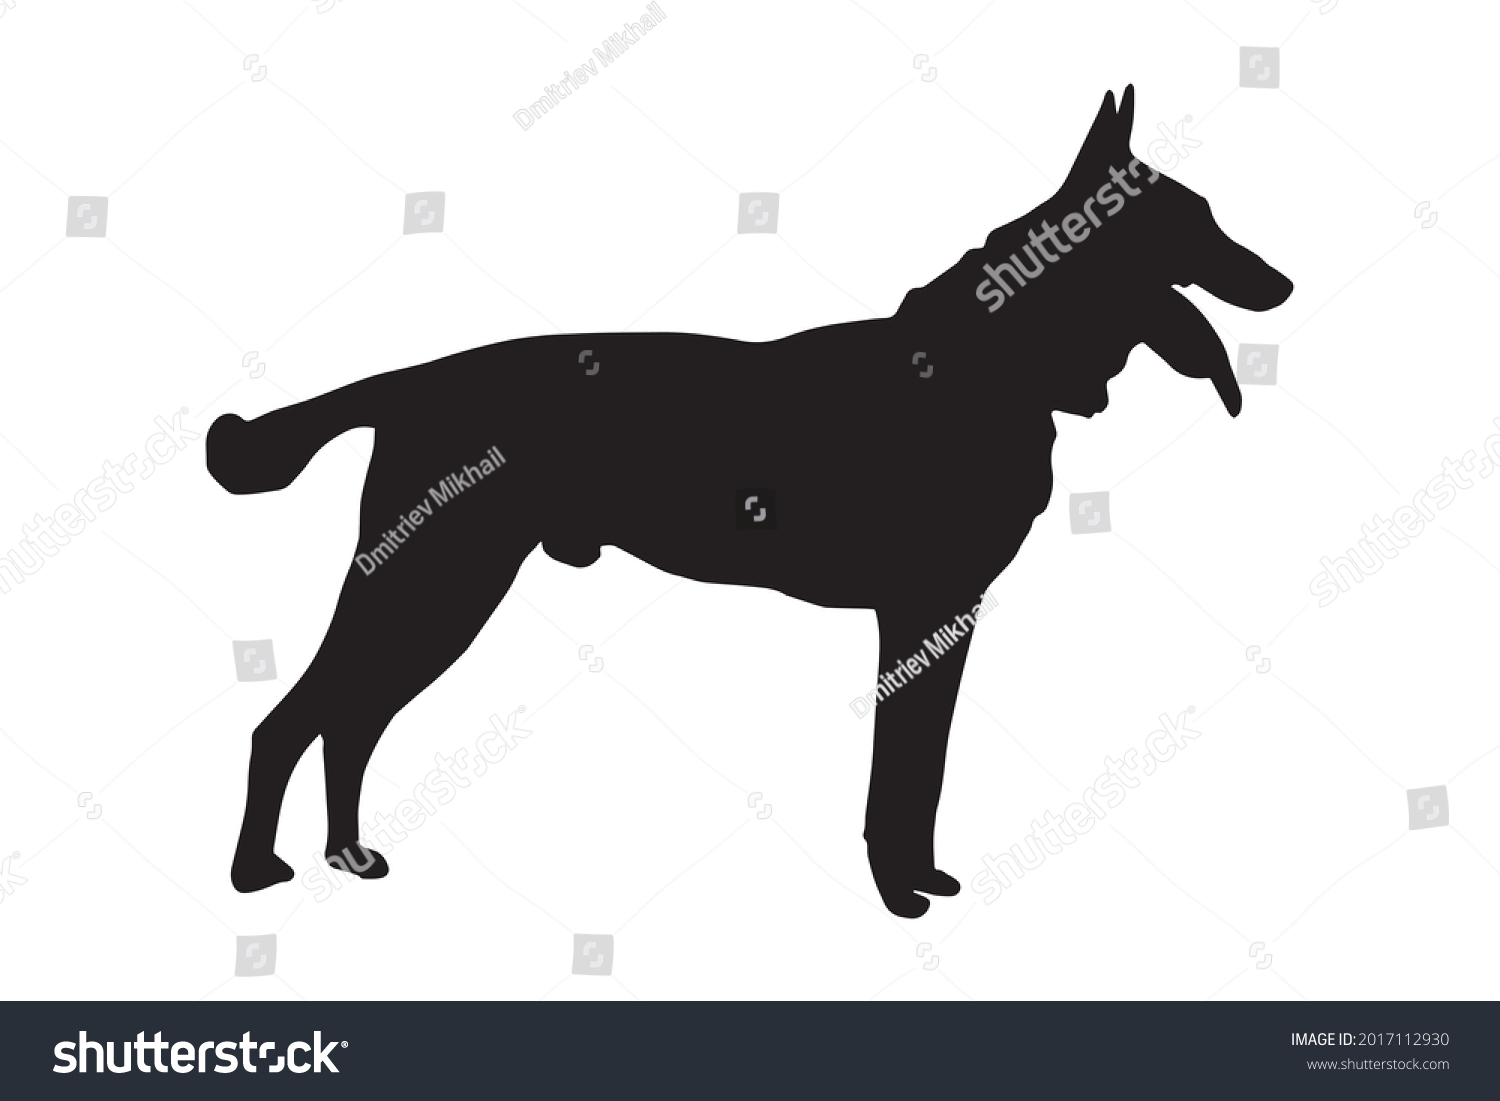 SVG of Black full height silhouette of a dog with tongue and tail sticking out on white.  Adult male Belgian Shepherd or Malinois. Side view.  svg